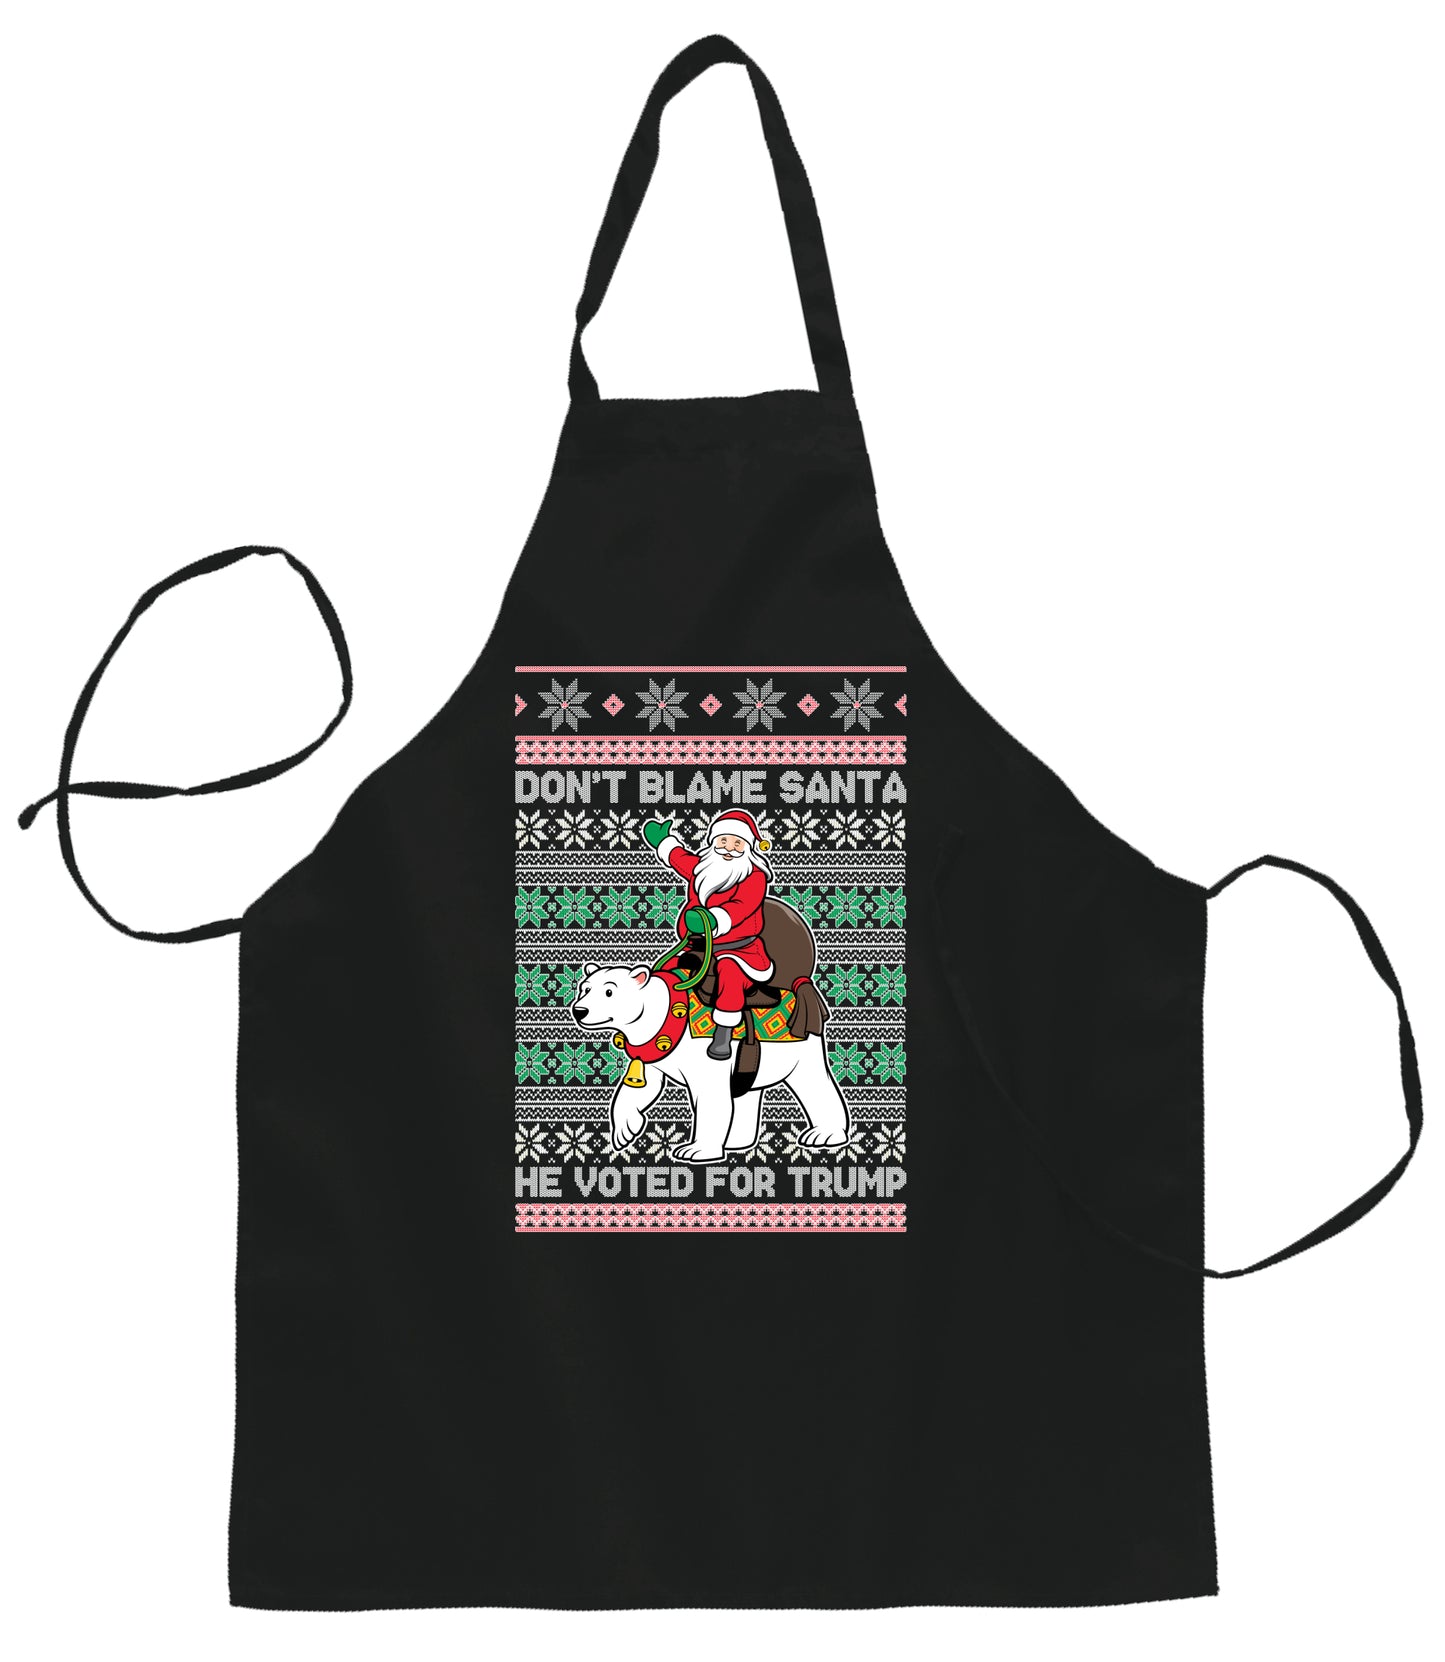 Don't Blame Santa He Voted for Trump  Ugly Christmas Sweater Ugly Christmas Butcher Graphic Apron for Kitchen BBQ Grilling Cooking